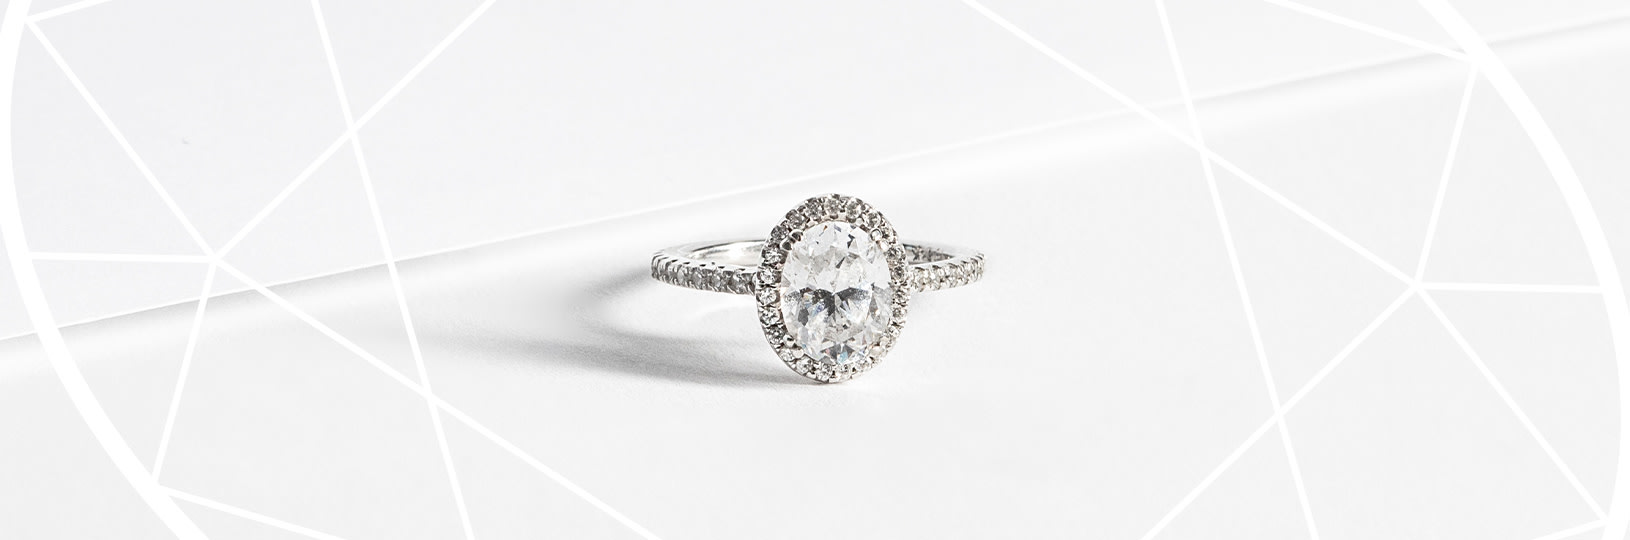 An oval cut stone in a halo engagement ring setting